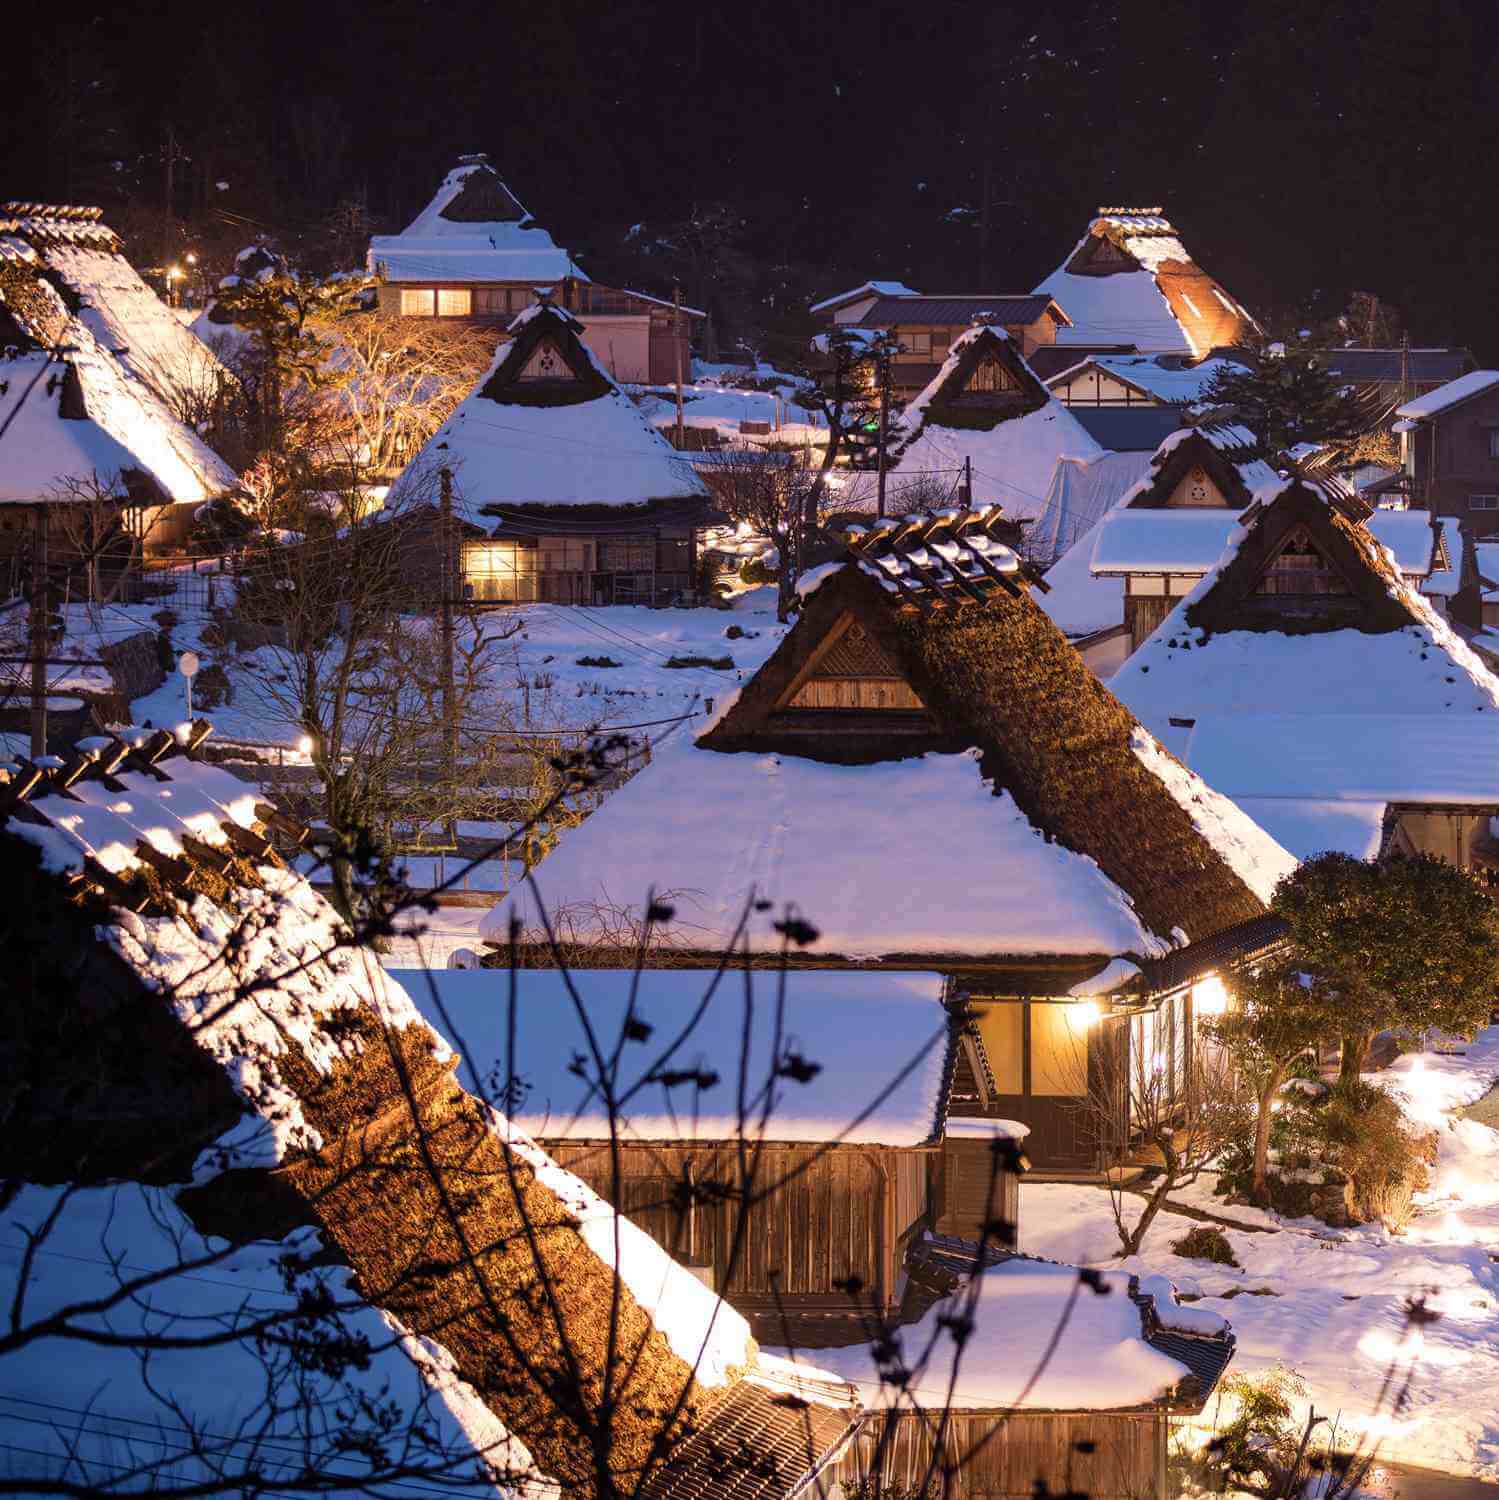 Photos of snow-covered villages9 Ouchi-juku